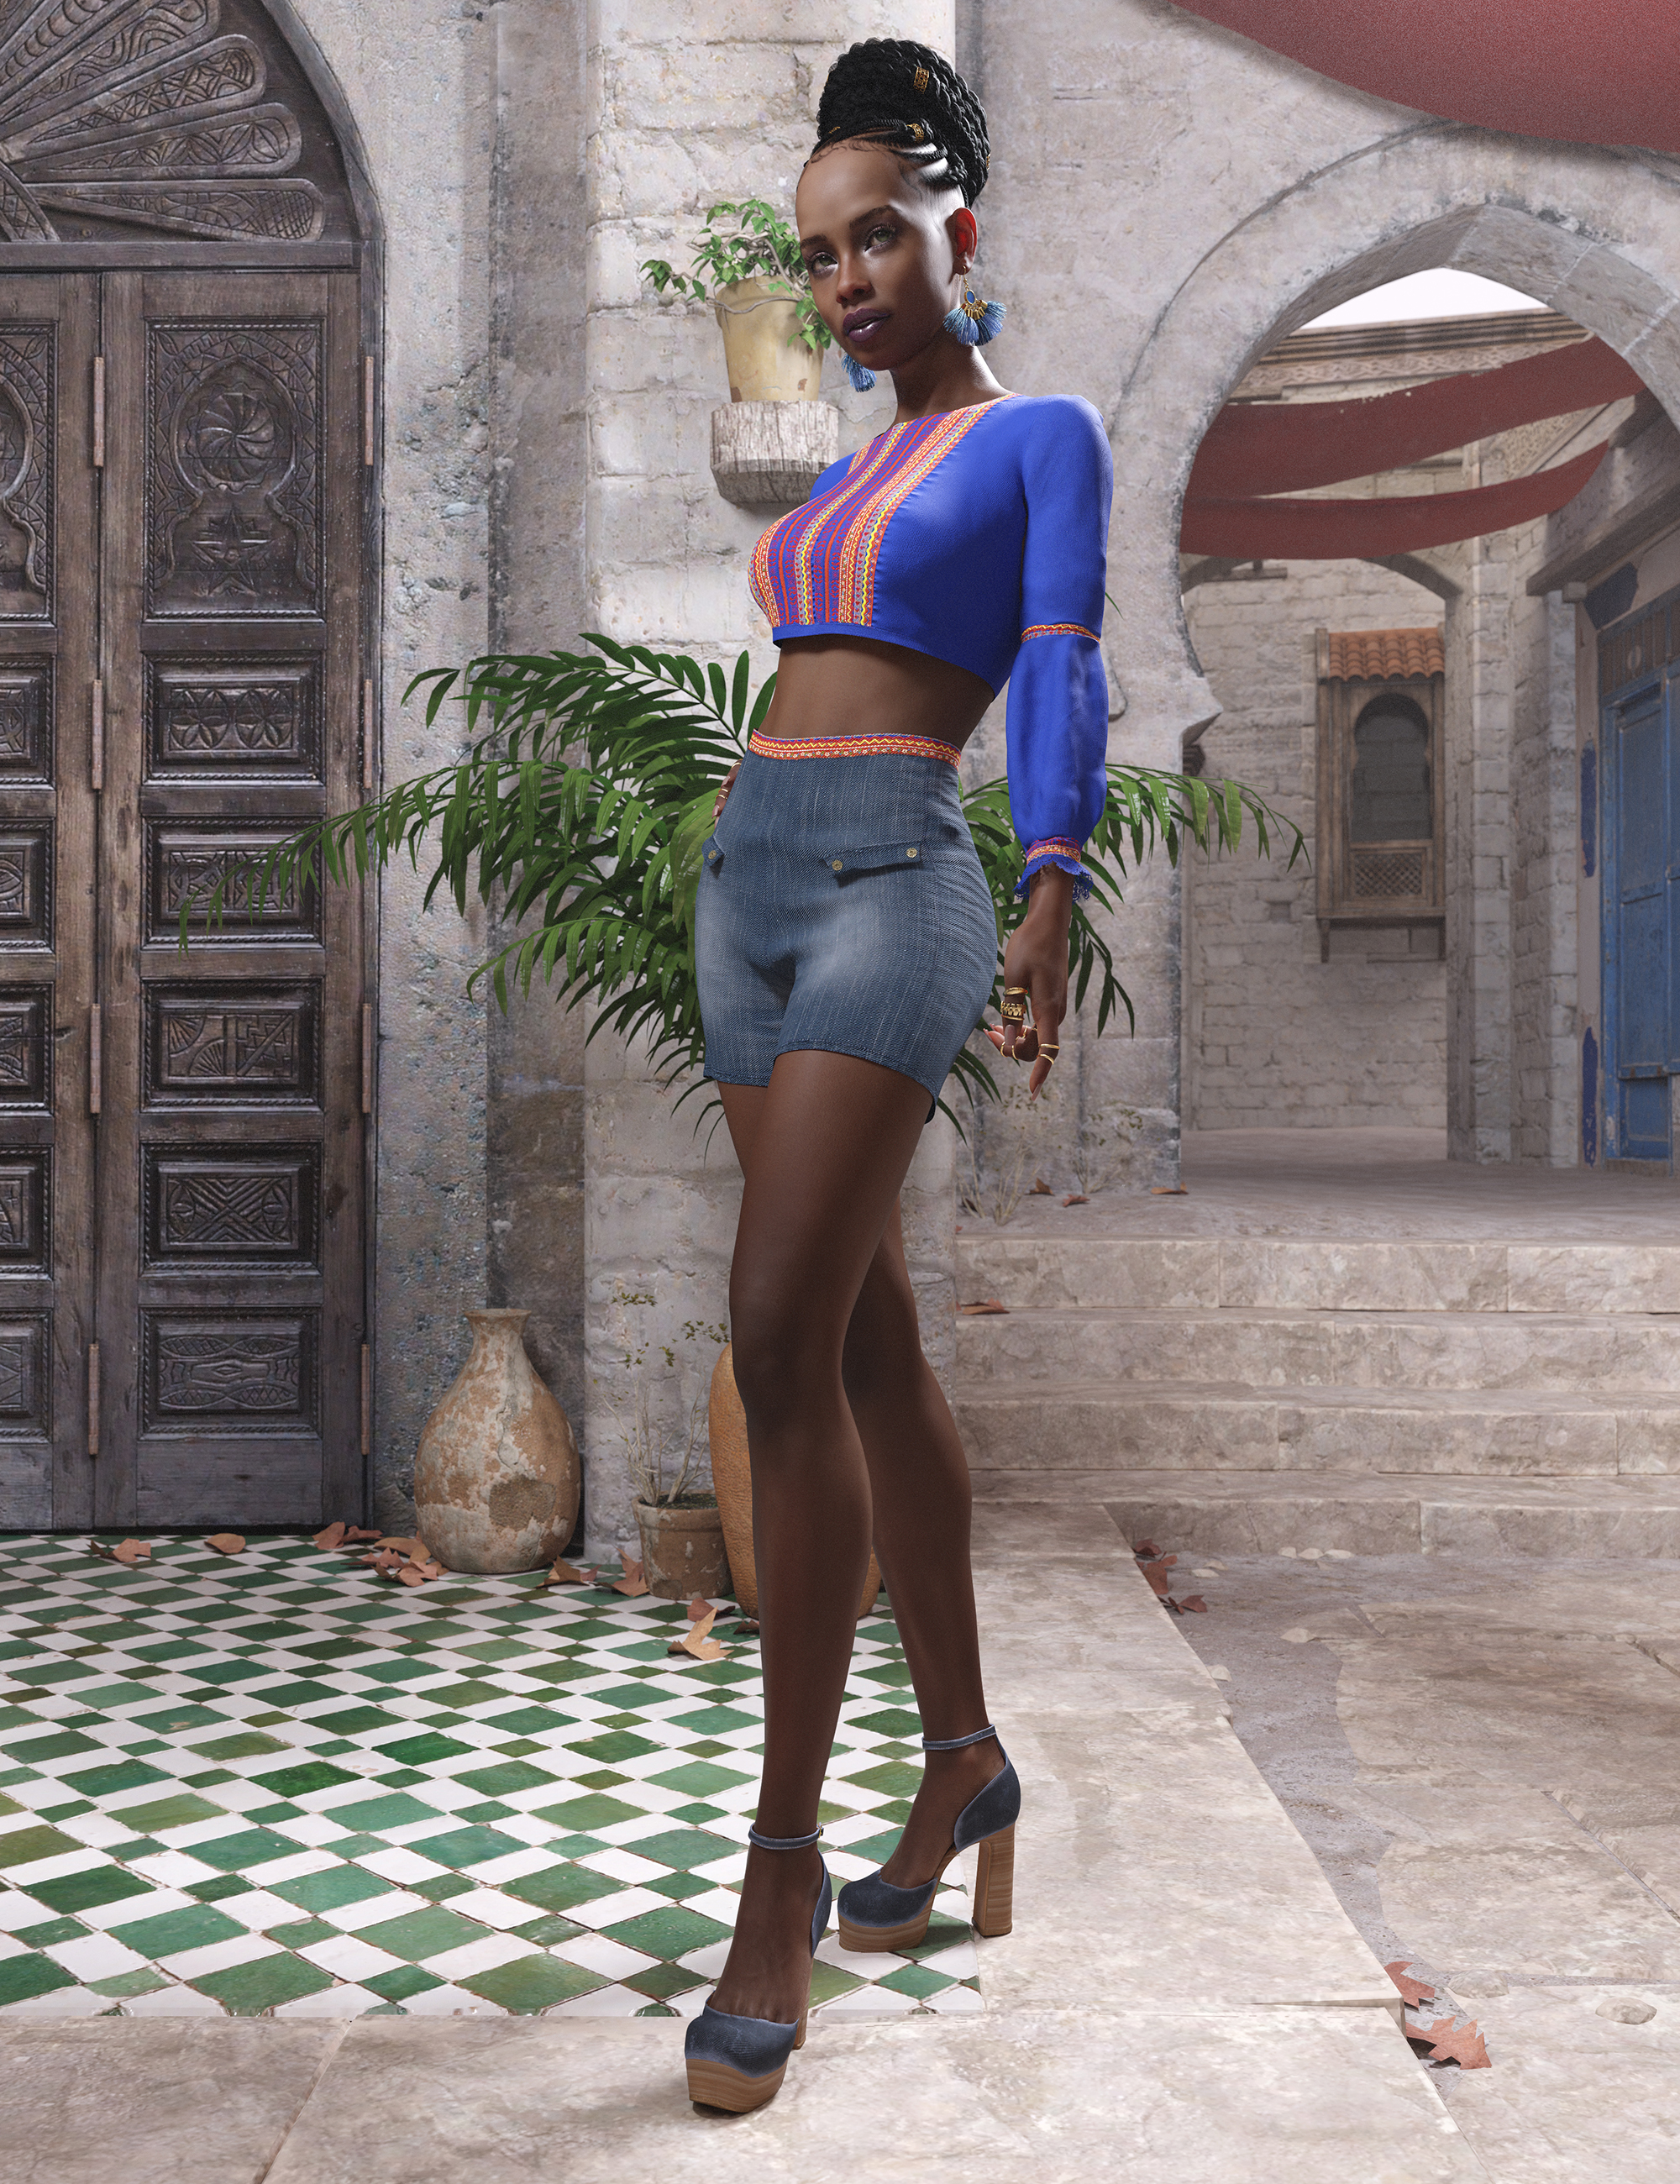 dForce Imola Outfit by: Sade, 3D Models by Daz 3D